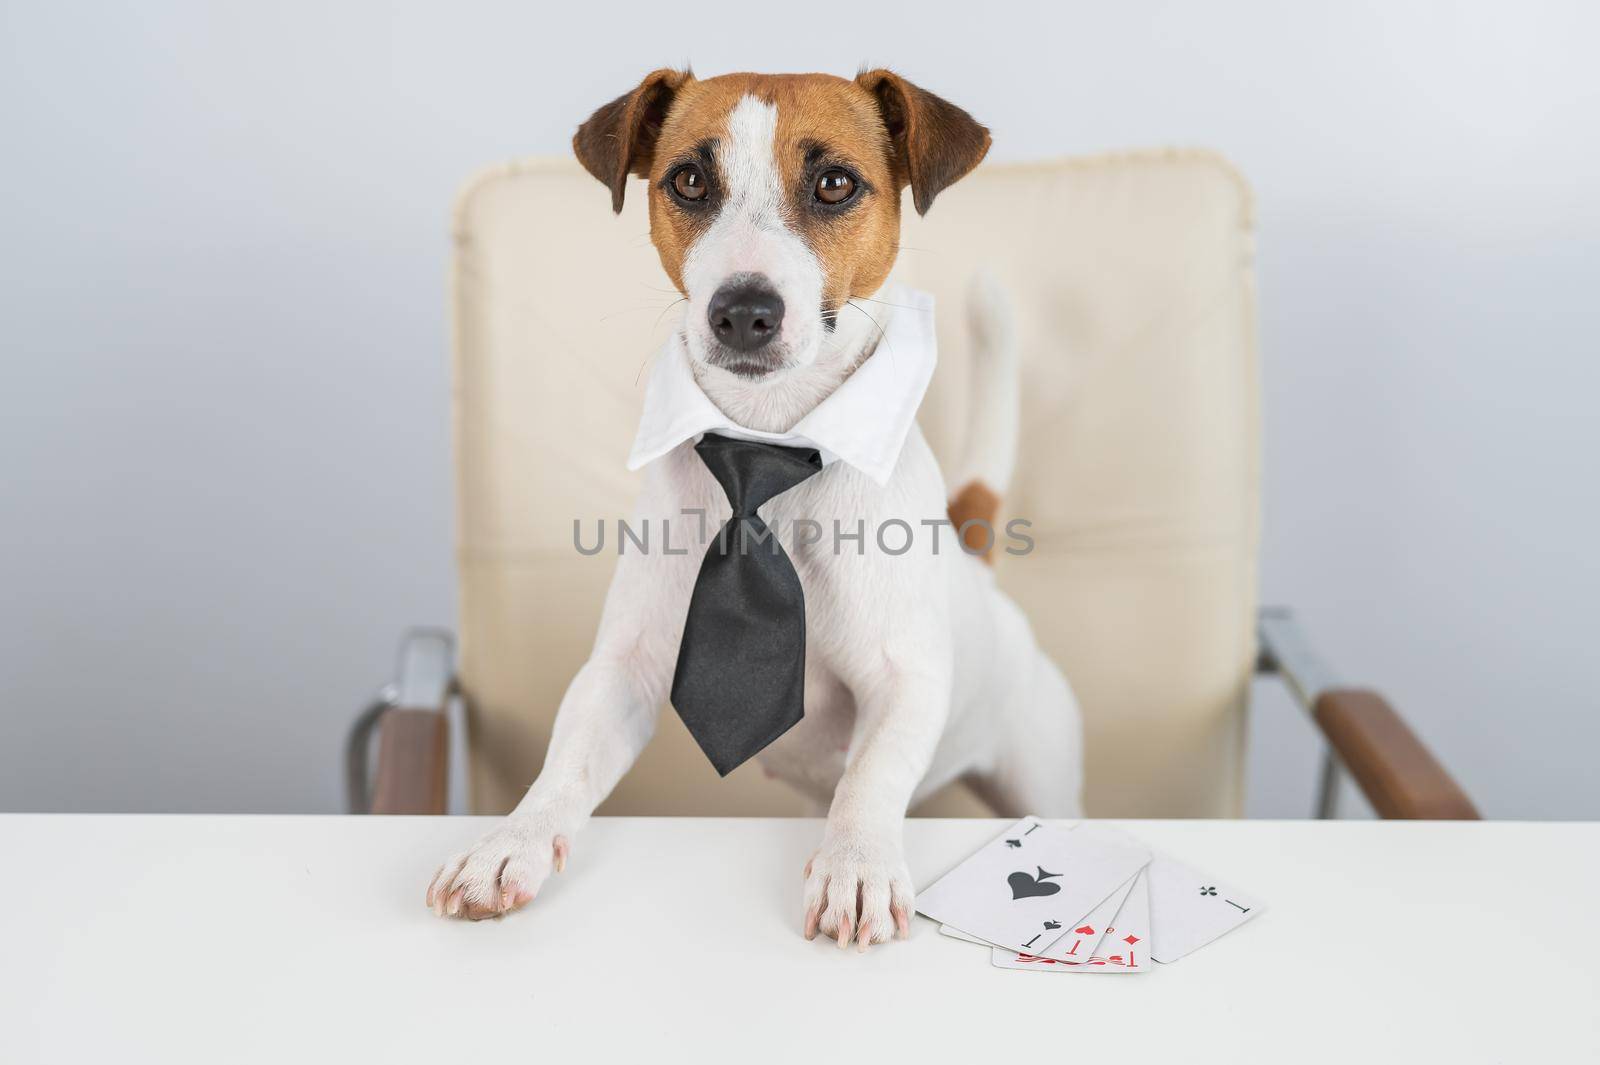 Jack russell terrier dog with glasses and tie plays poker. Addiction to gambling card games. by mrwed54